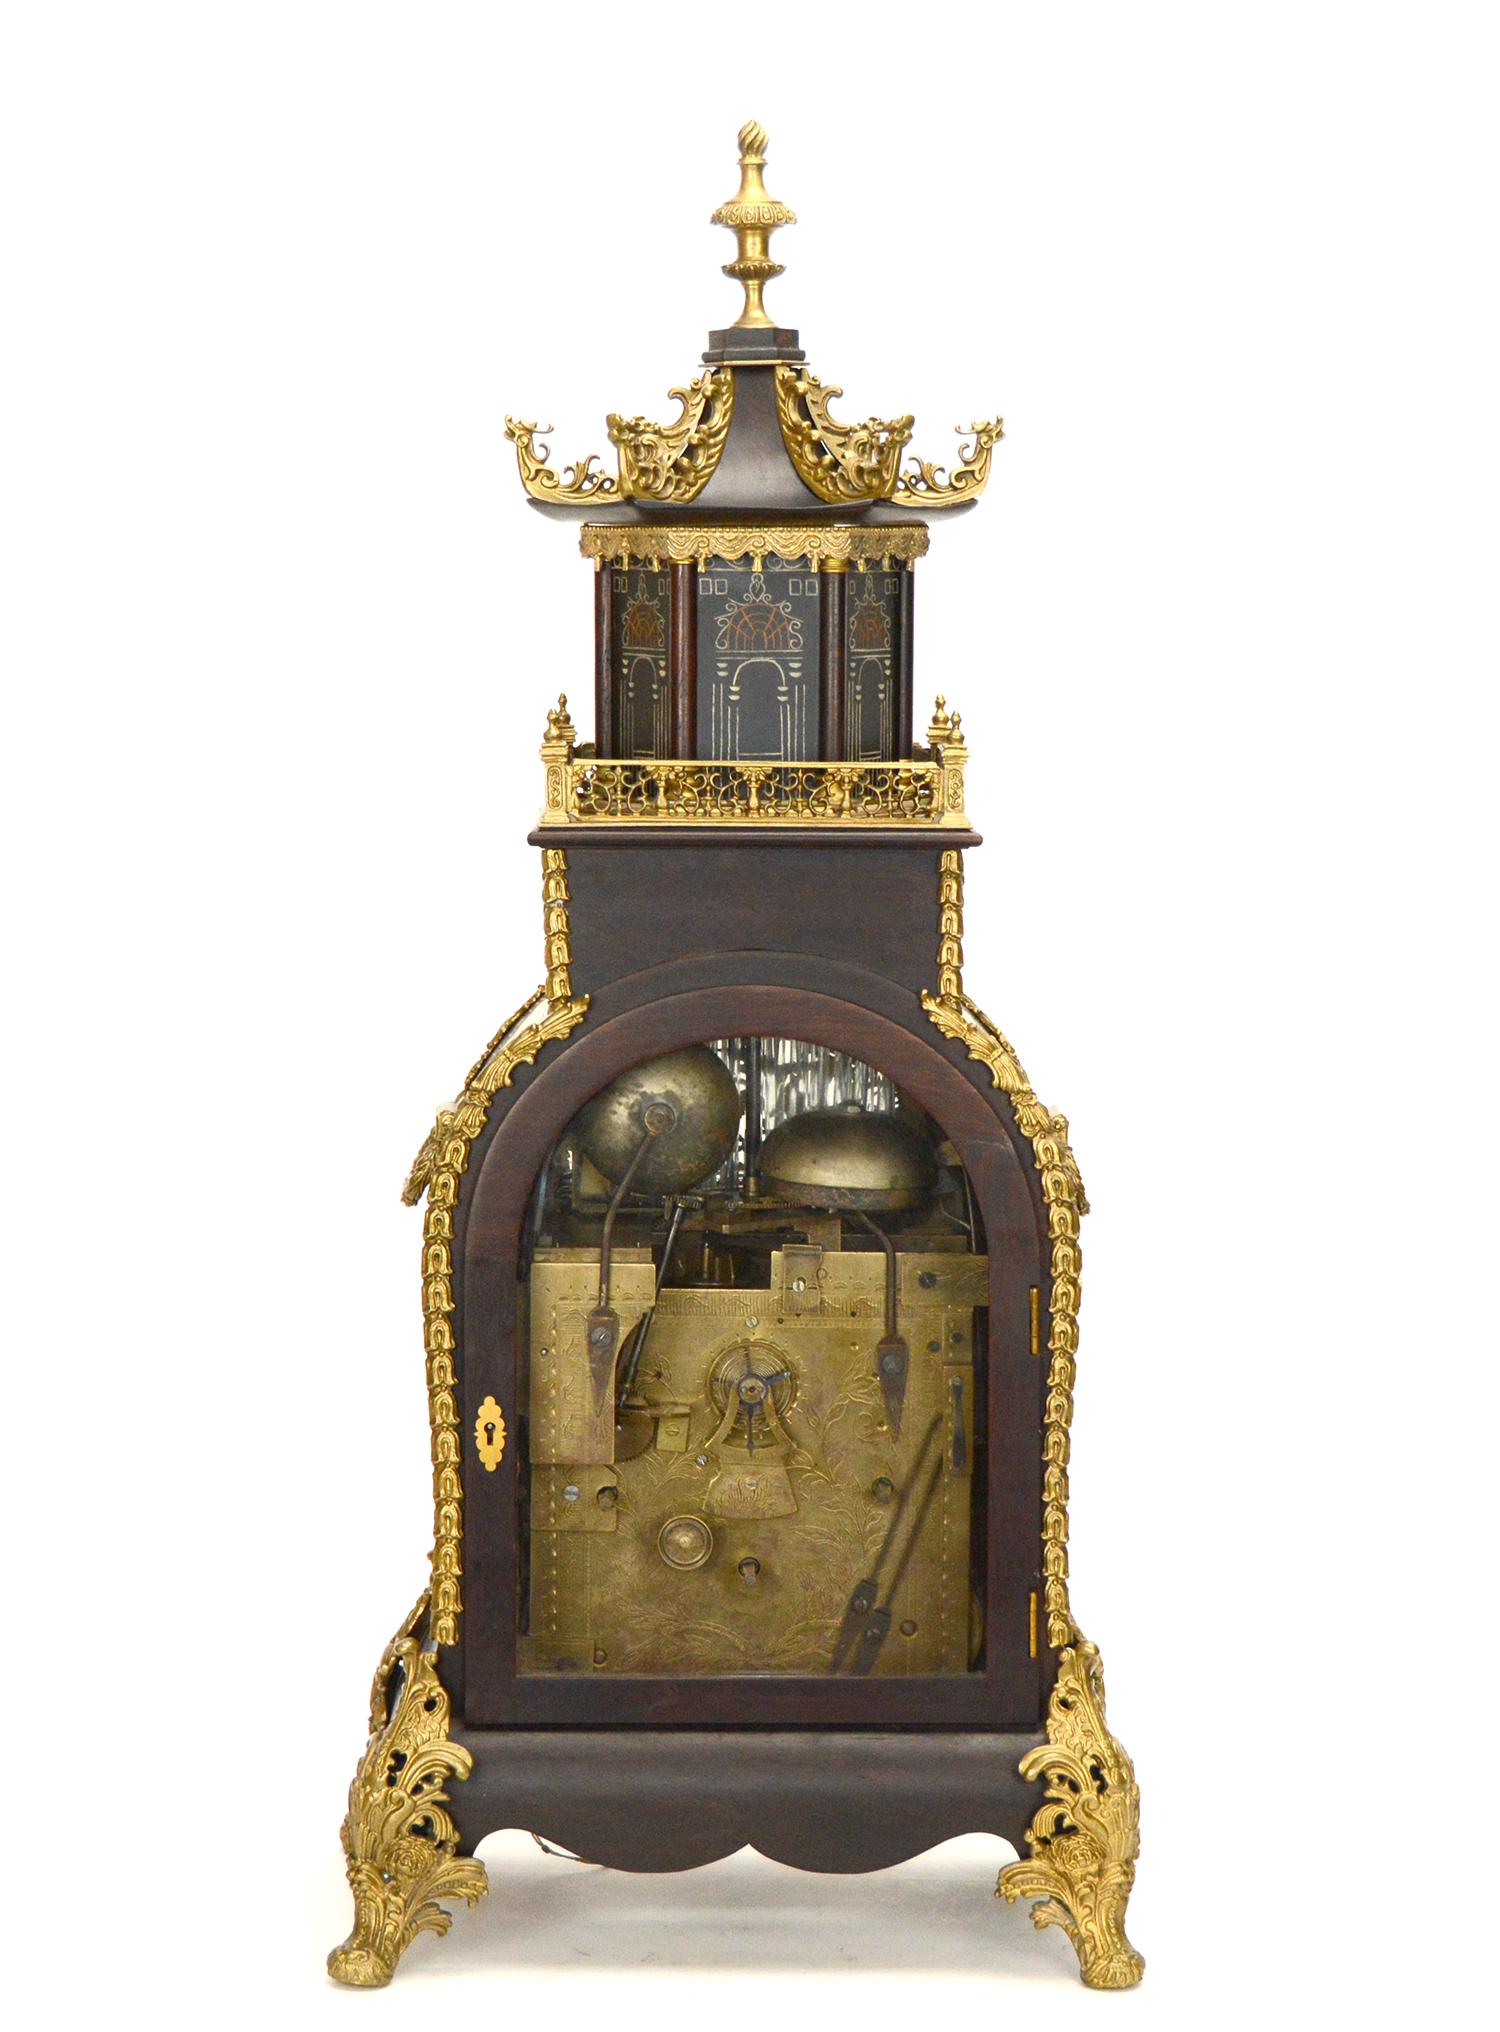 Vintage Chinese Canton Automaton Acrobat Musical Pagoda Waterfall Bracket Clock For Sale 3